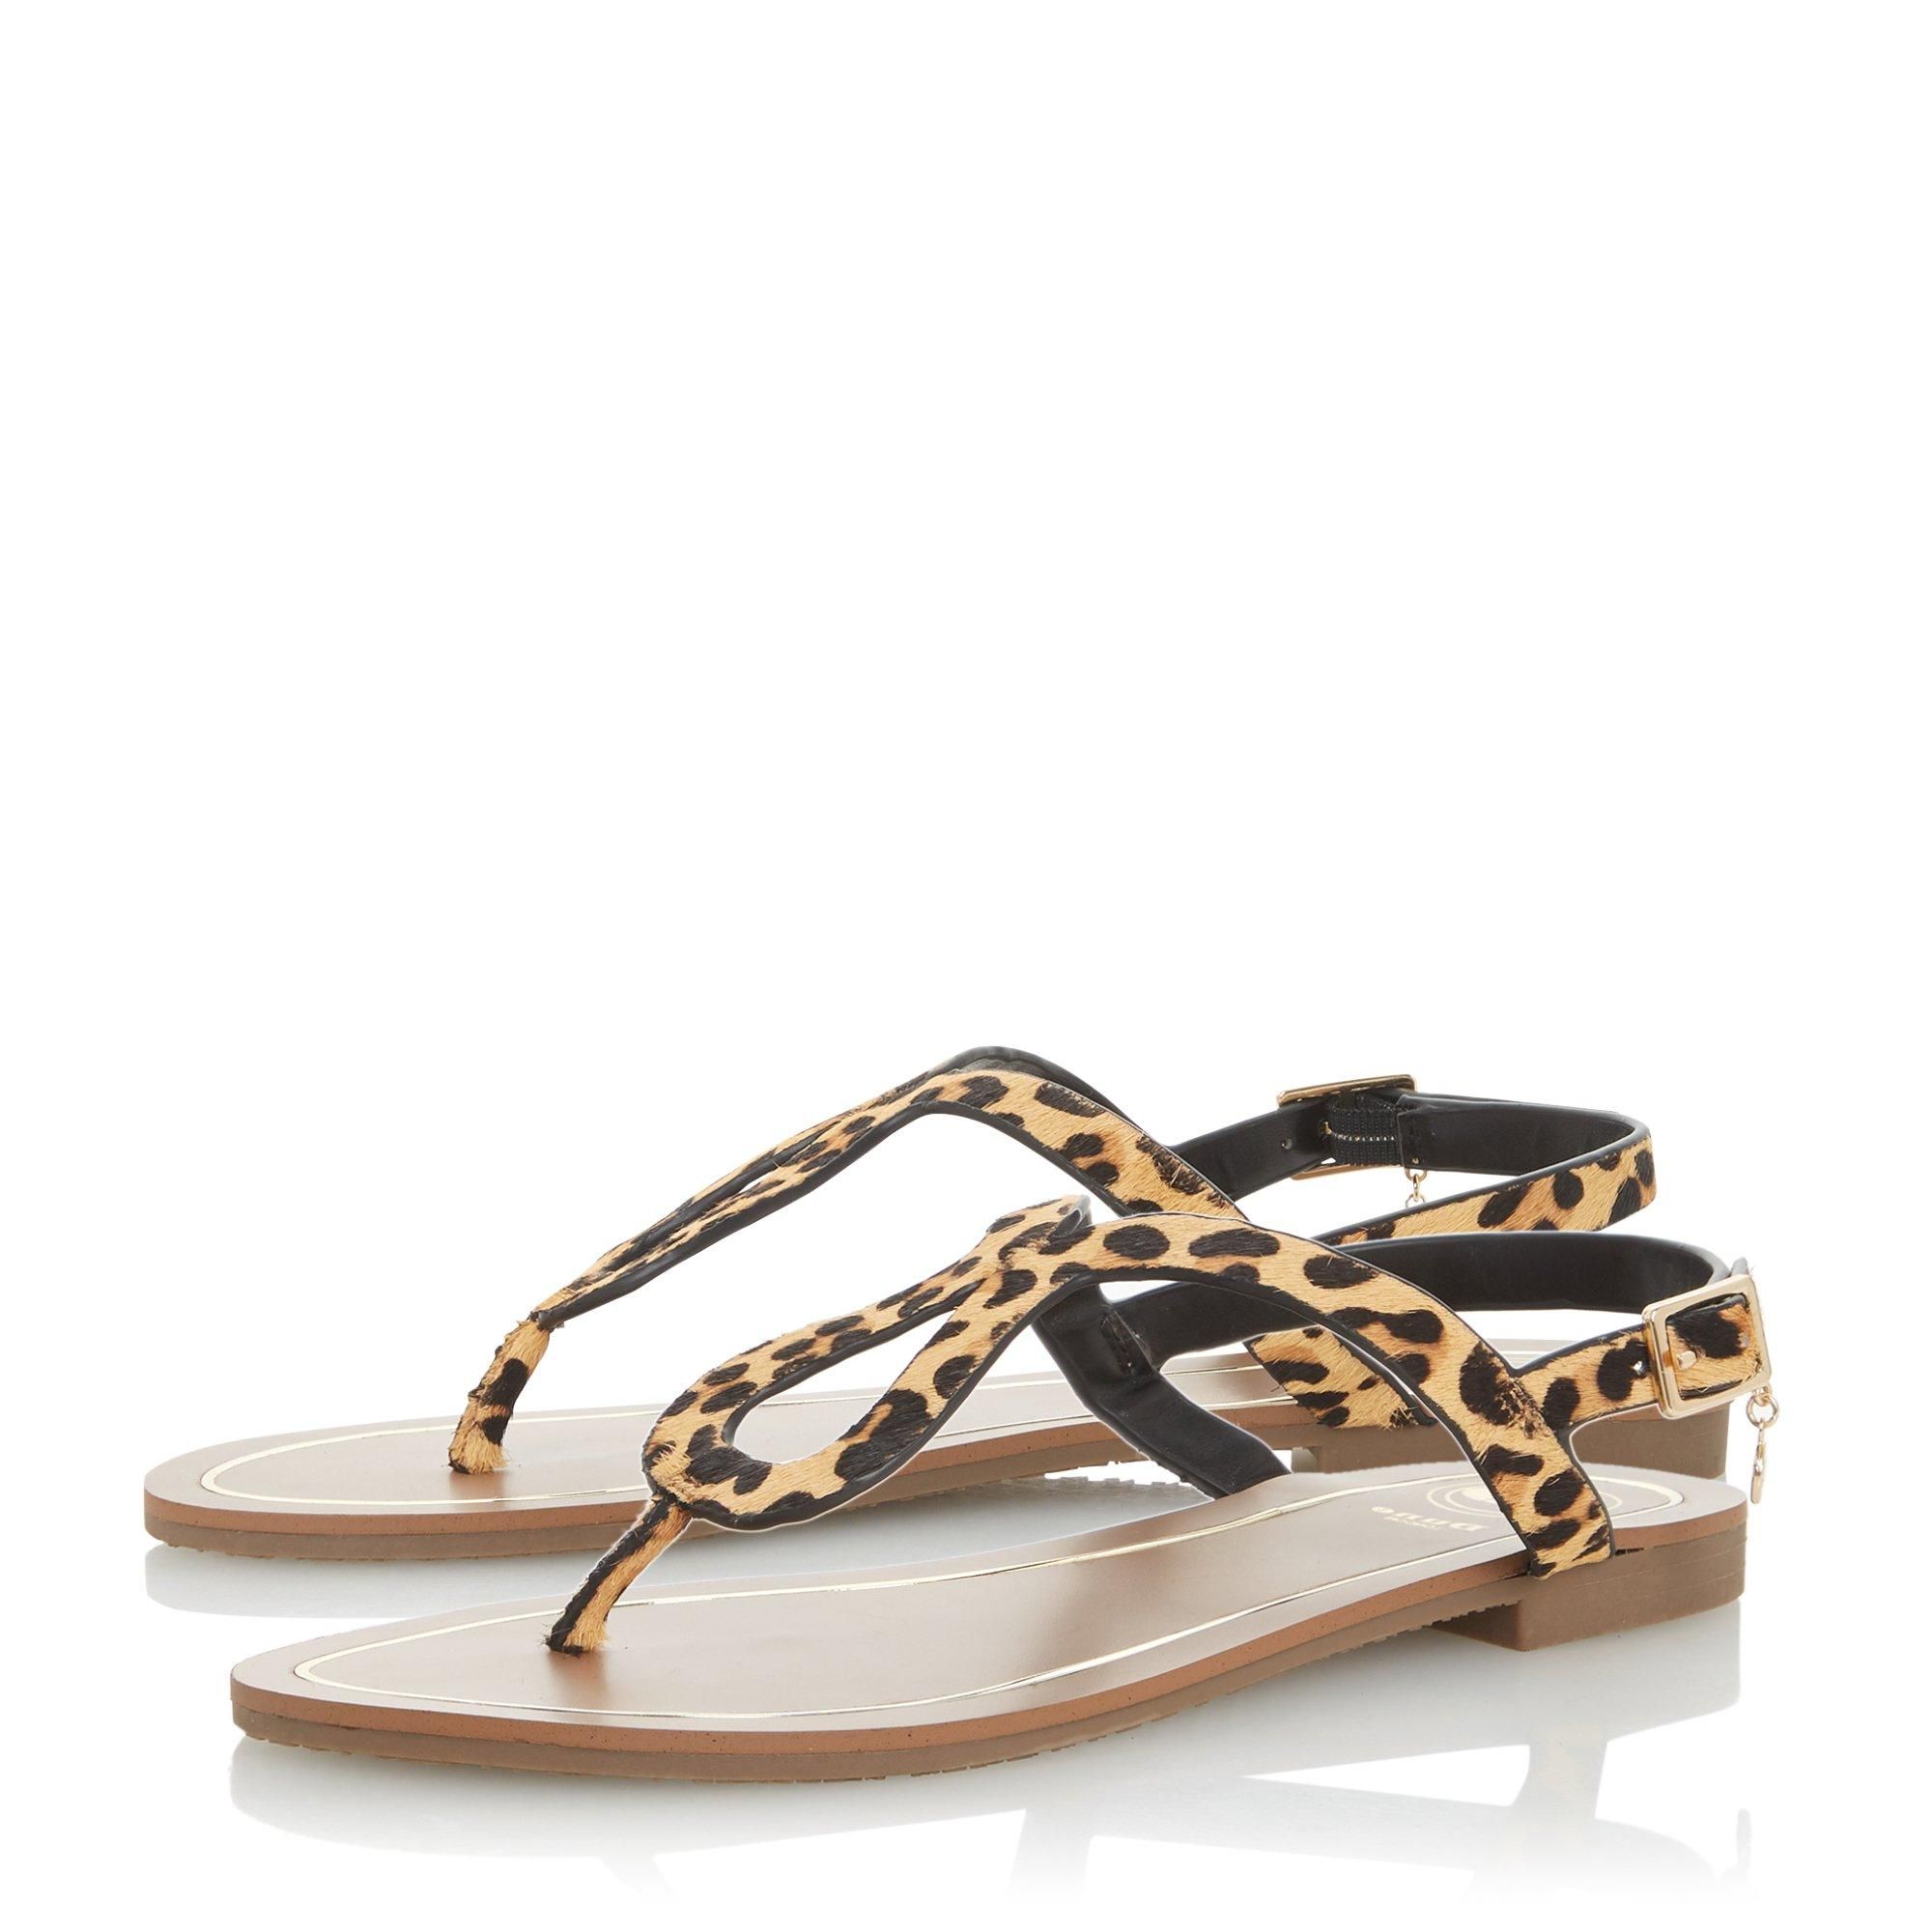 Elevate your summer edit with the Linay sandal from Dune London. Showcasing a diamante-encrusted strap and toe post detailing. It's complete with a low block heel and a secure buckle fastening.